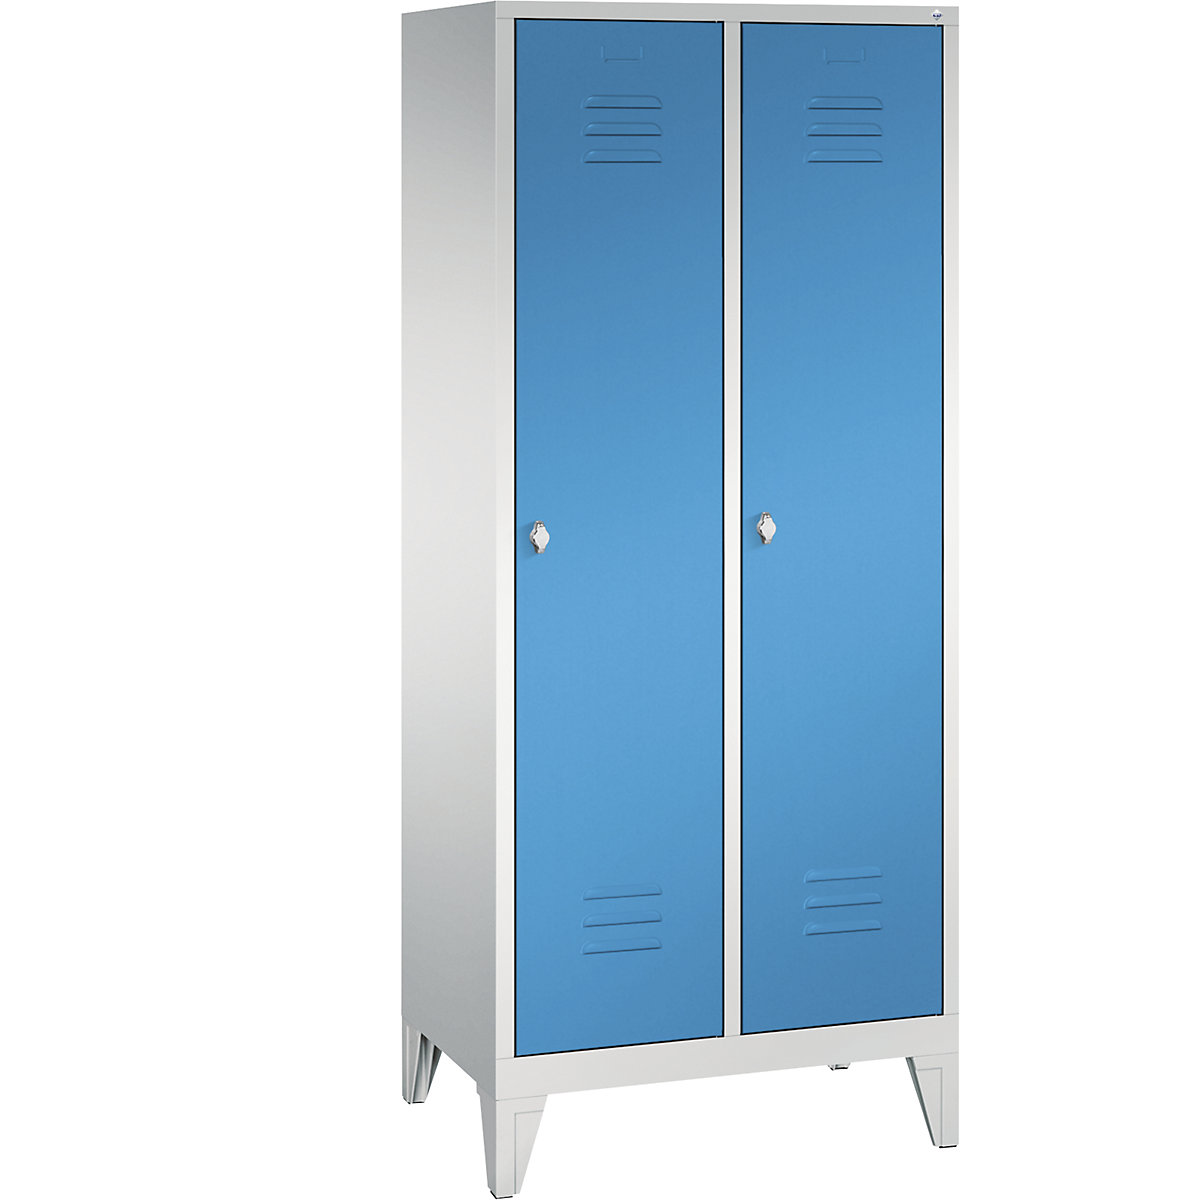 CLASSIC storage cupboard with feet – C+P, 2 compartments, compartment width 400 mm, light grey / light blue-14